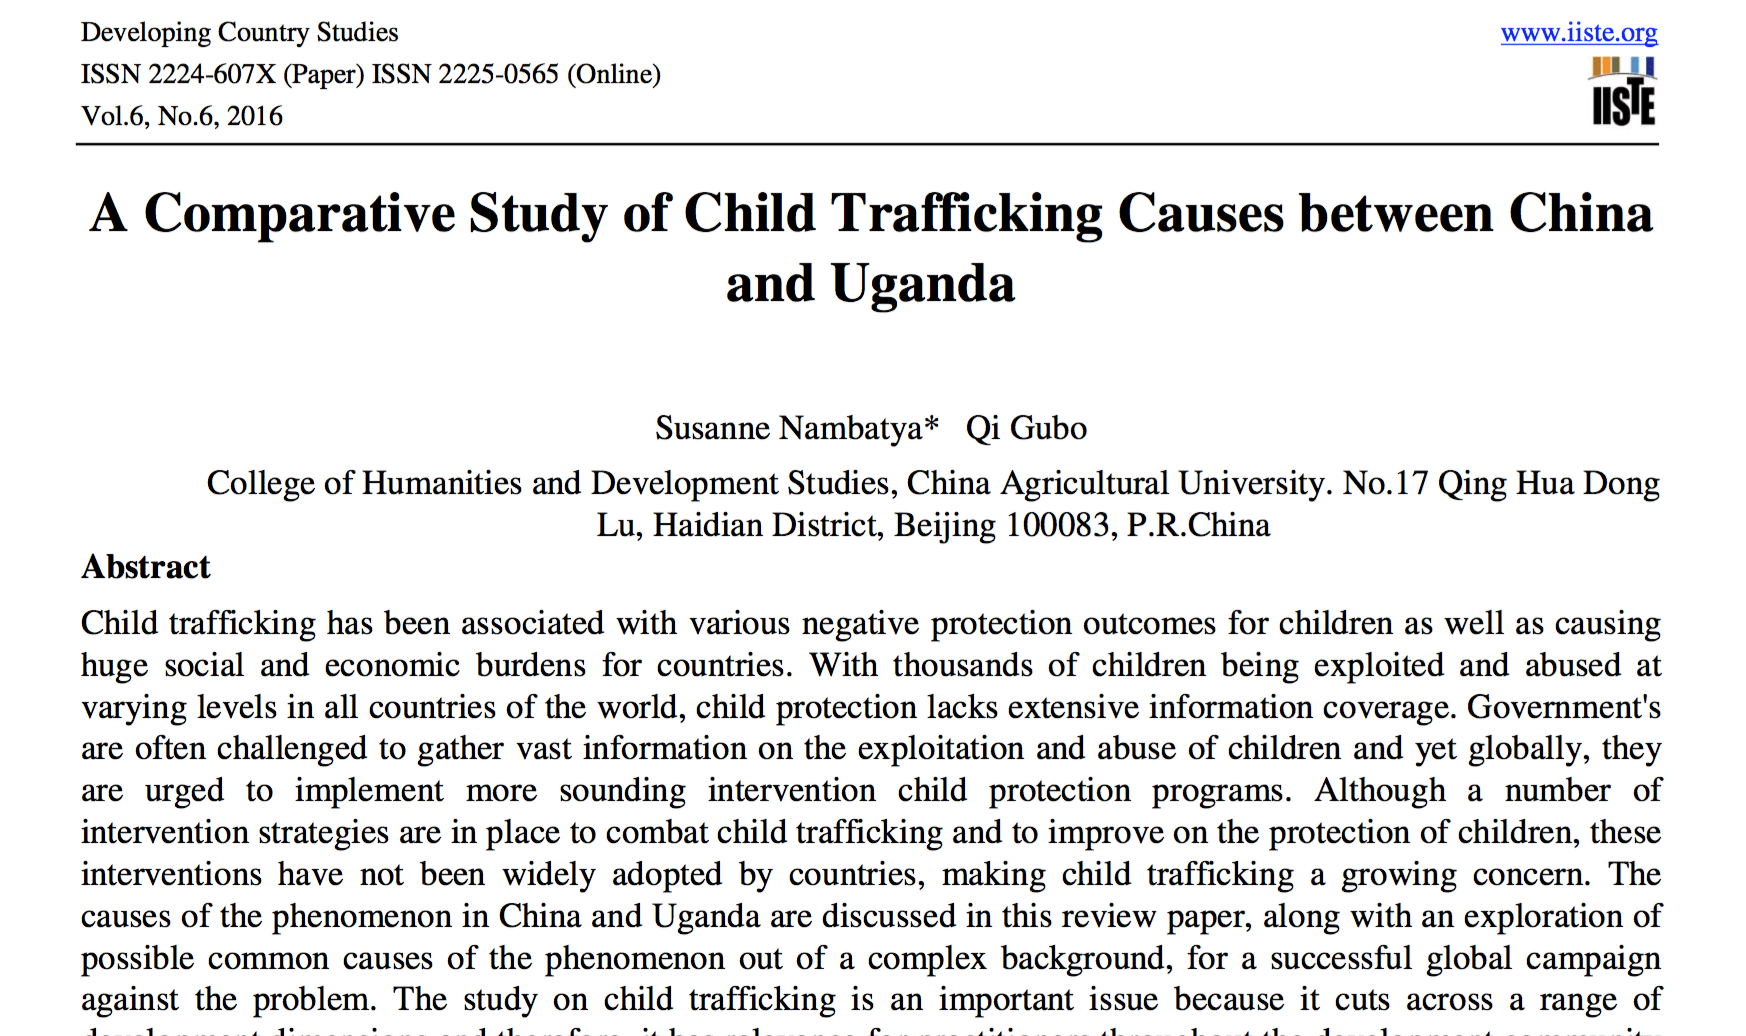 A comparison of child trafficking causes between China and Uganda